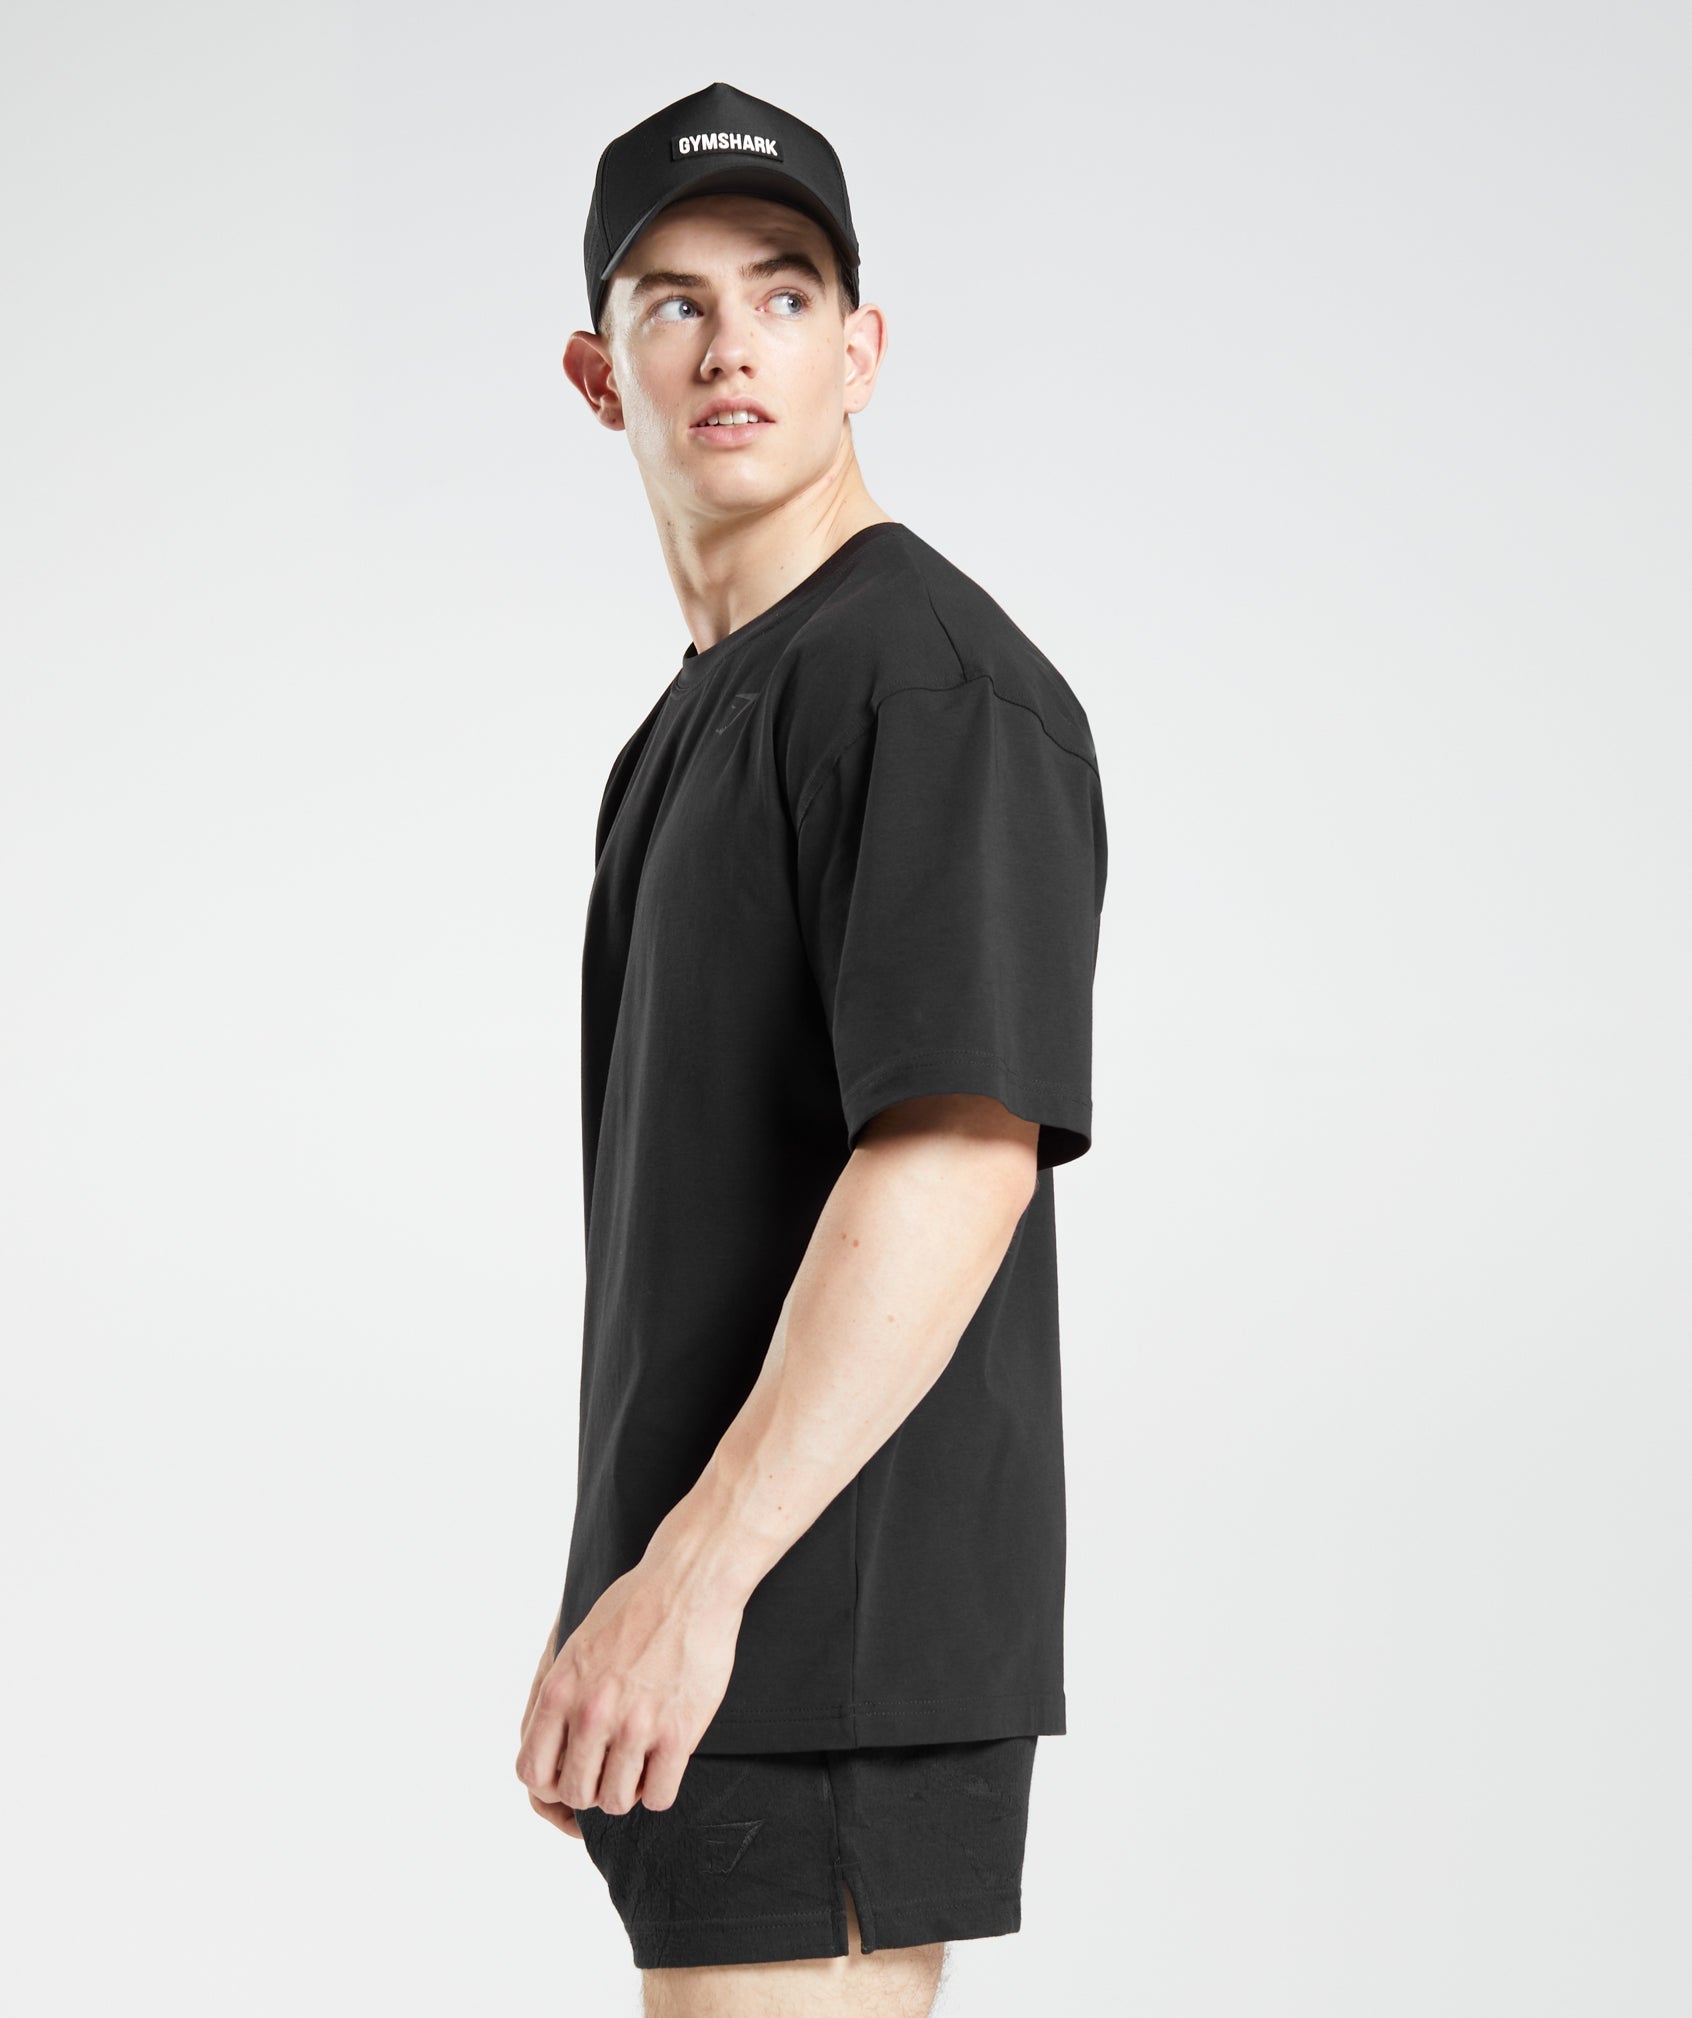 Power T-Shirt in Black - view 5